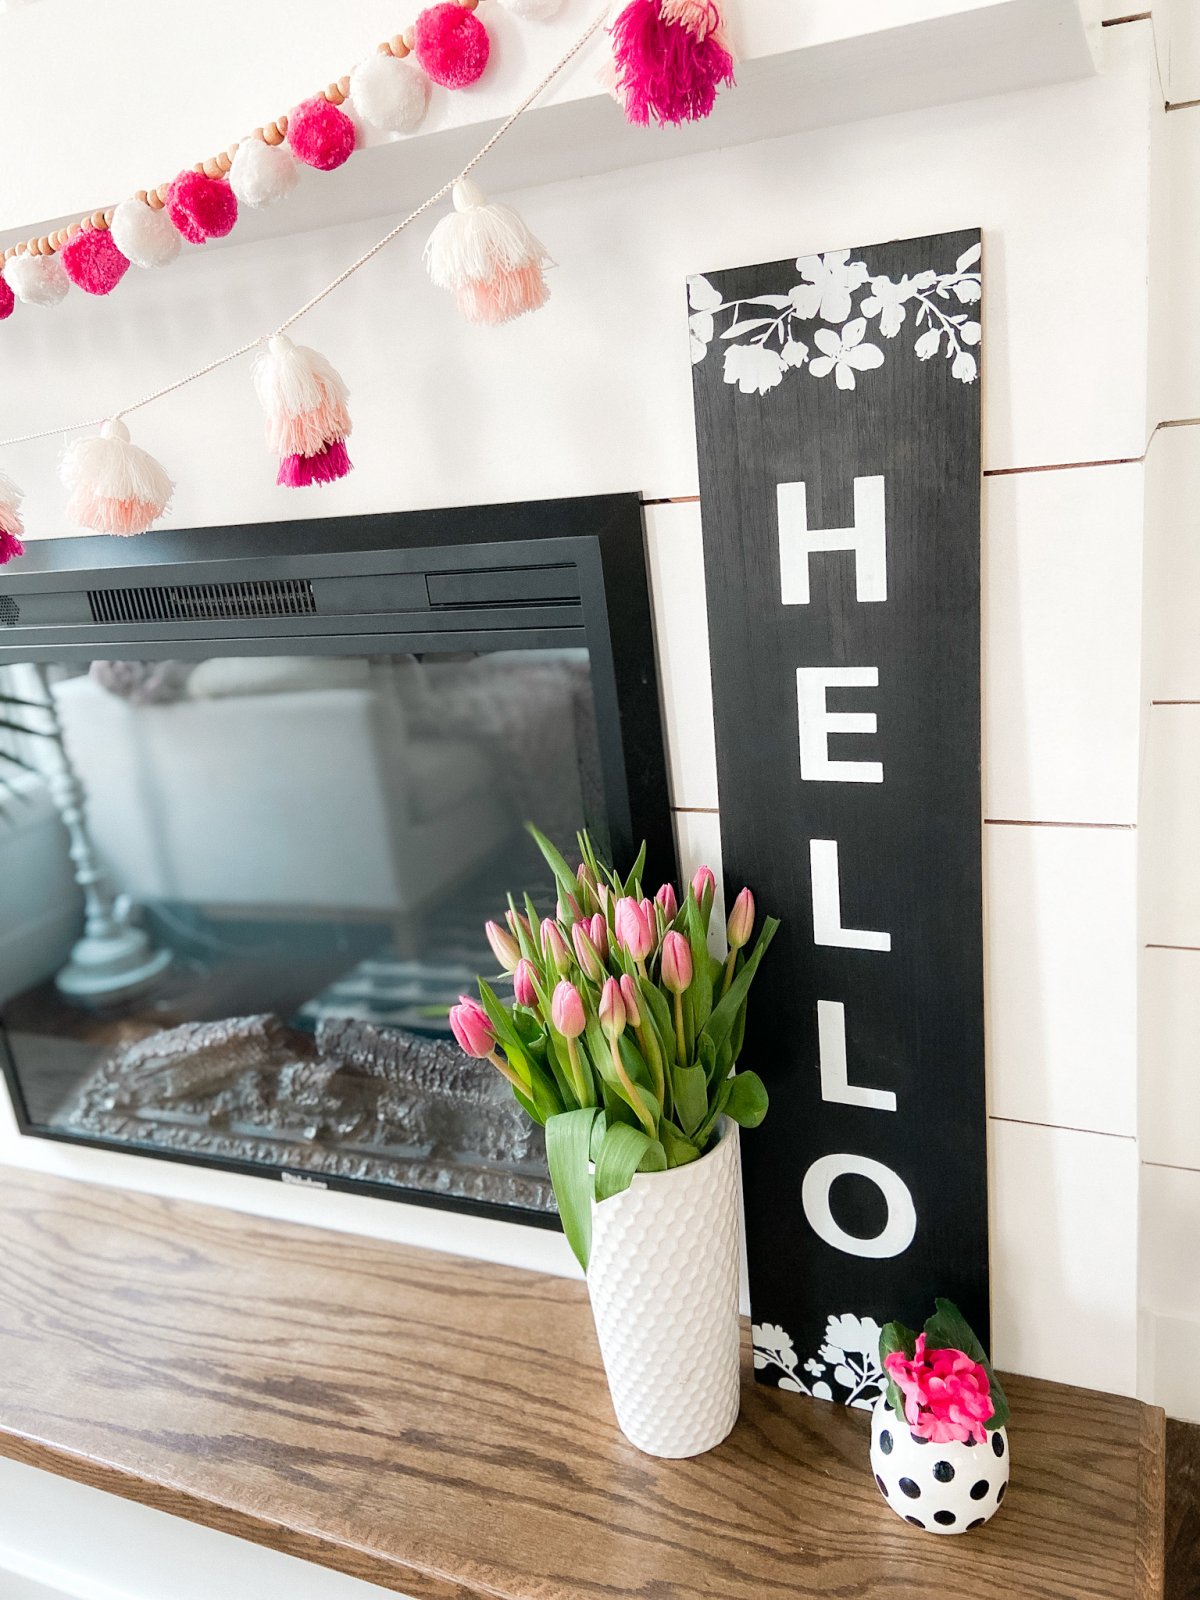 Colorful Spring Mantel with DIY Chalkboard Sign. Add spring color to your home with bright flowers, pretty accents and a DIY chalkboard!